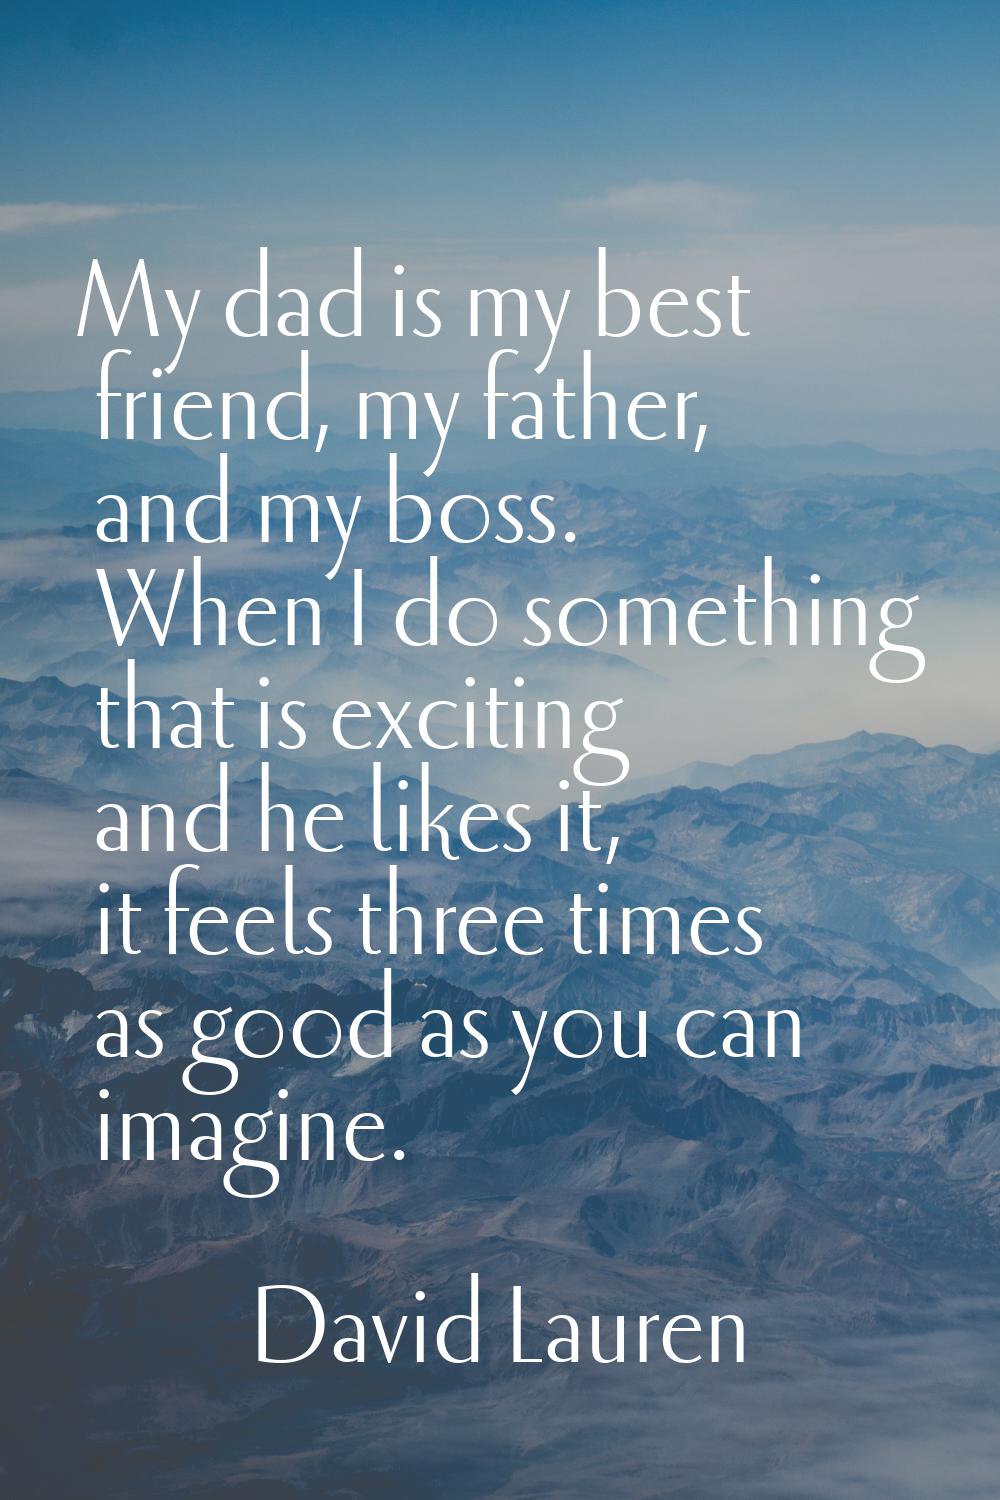 My dad is my best friend, my father, and my boss. When I do something that is exciting and he likes